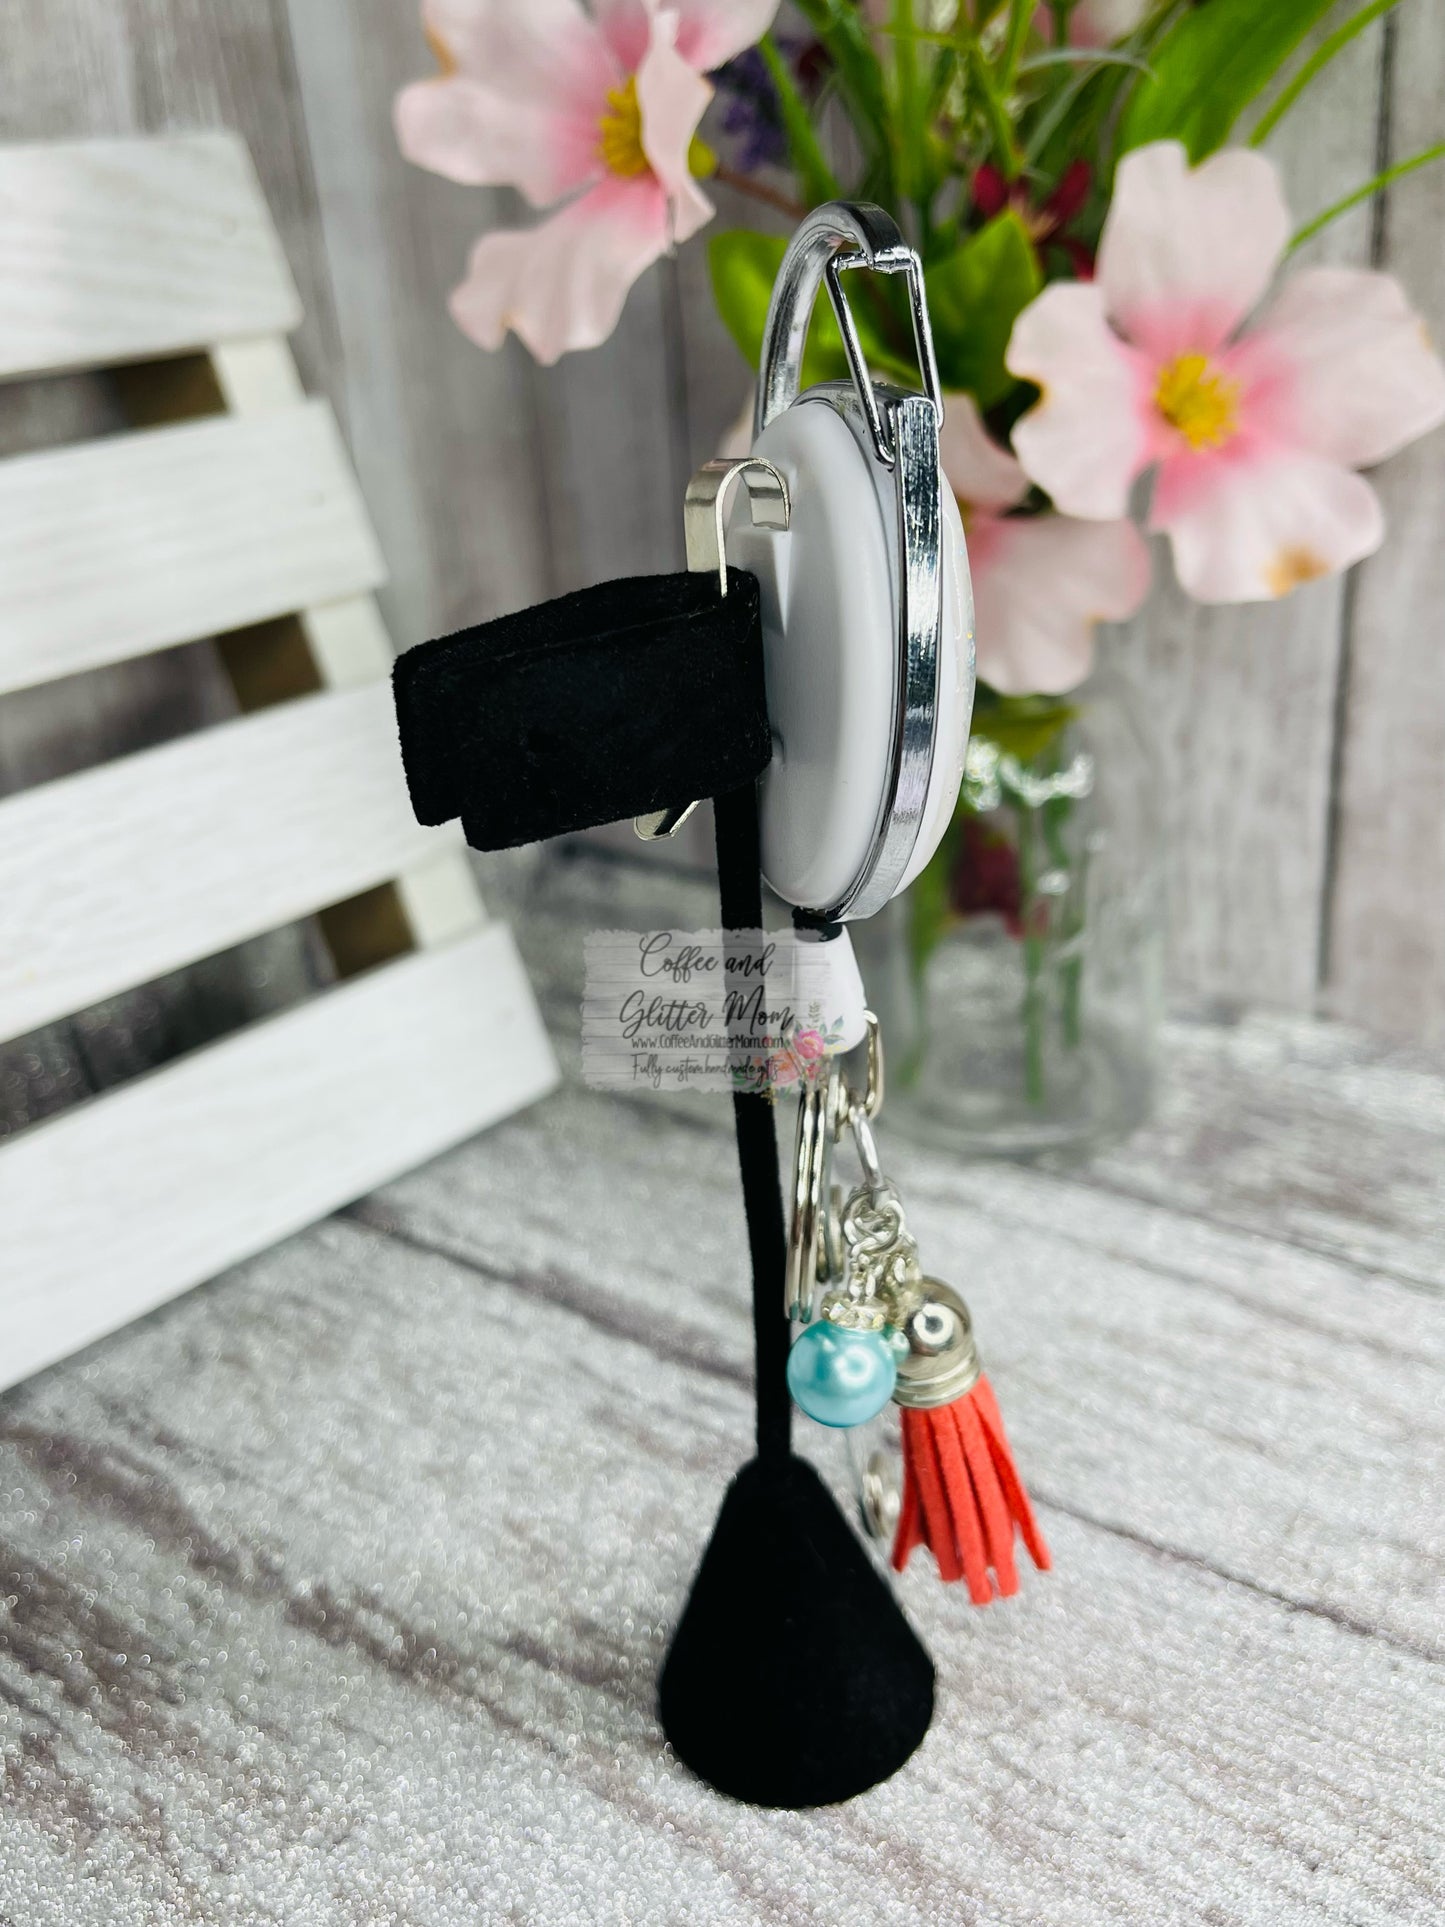 Make Life Colorful Clip On Retractable Key Ring